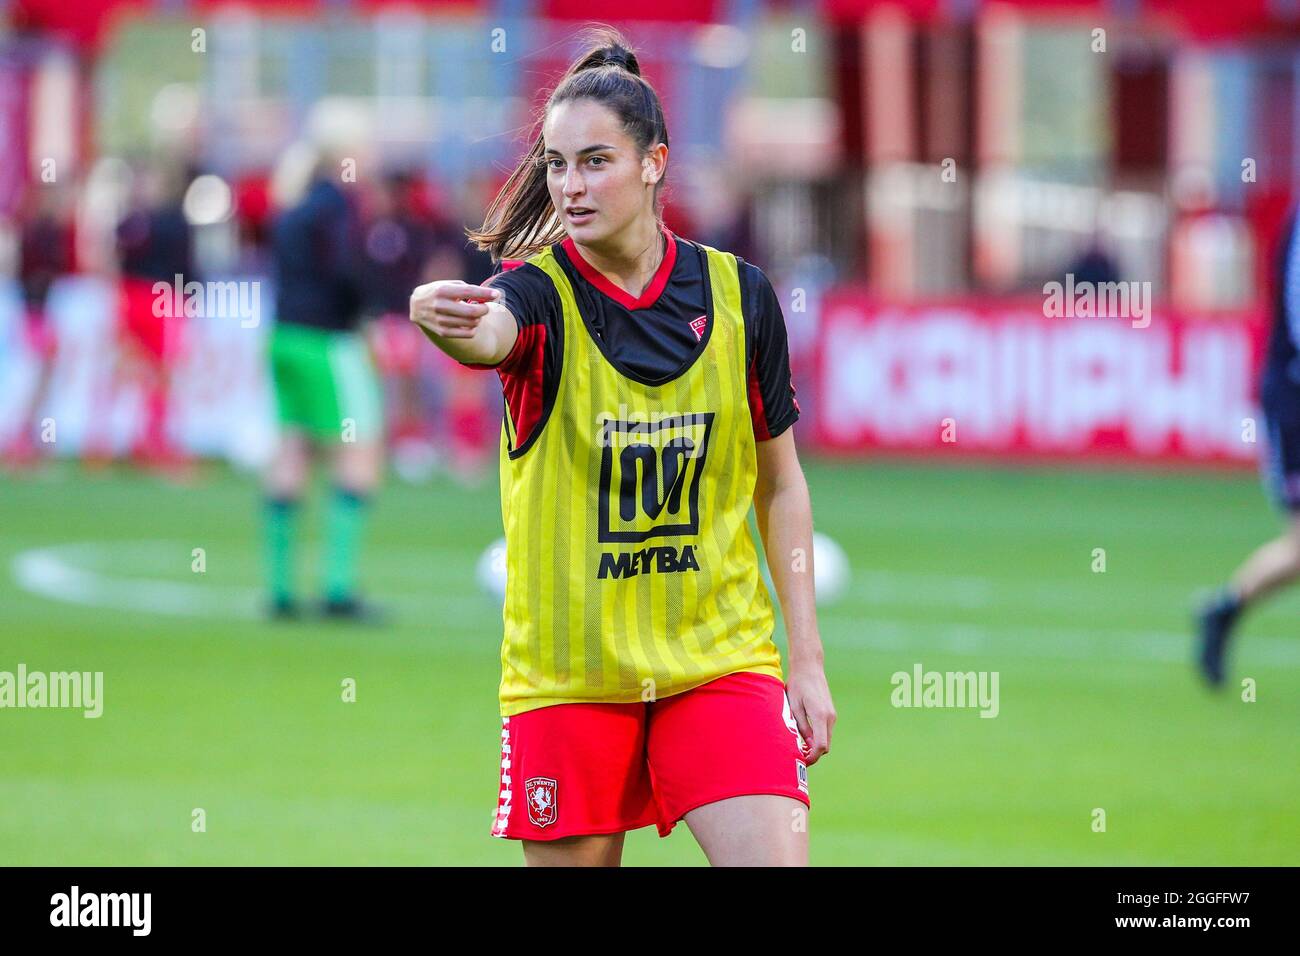 ENSCHEDE, NETHERLANDS - AUGUST 31: Caitlin Dijkstra of FC Twente during the  UEFA Women's Champions League 2021/2022 Second Qualifying Round match  between FC Twente and SL Benfica at Grolschveste on August 31,